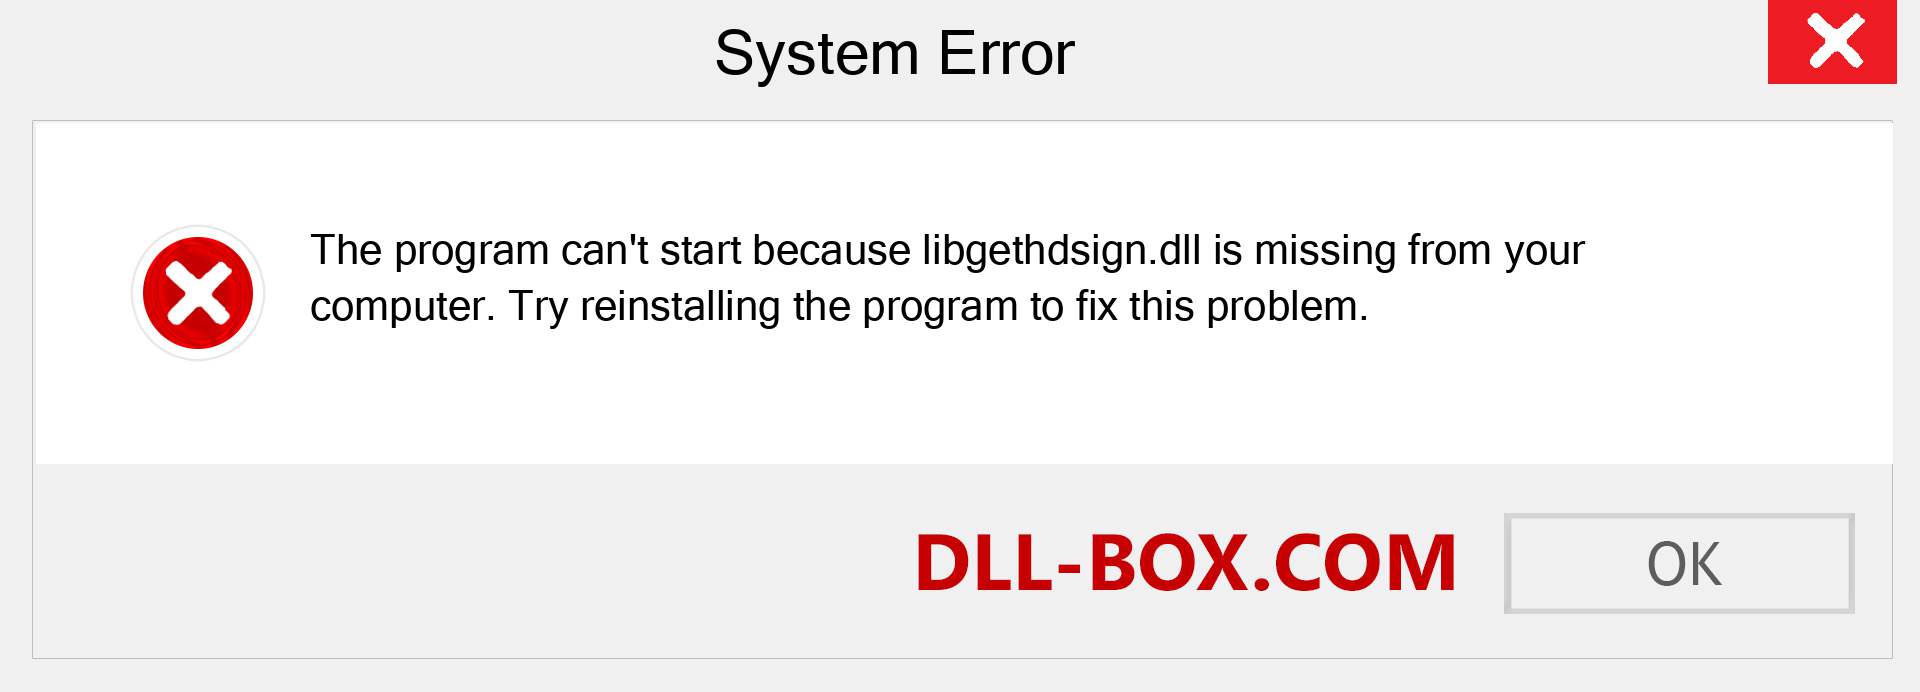  libgethdsign.dll file is missing?. Download for Windows 7, 8, 10 - Fix  libgethdsign dll Missing Error on Windows, photos, images